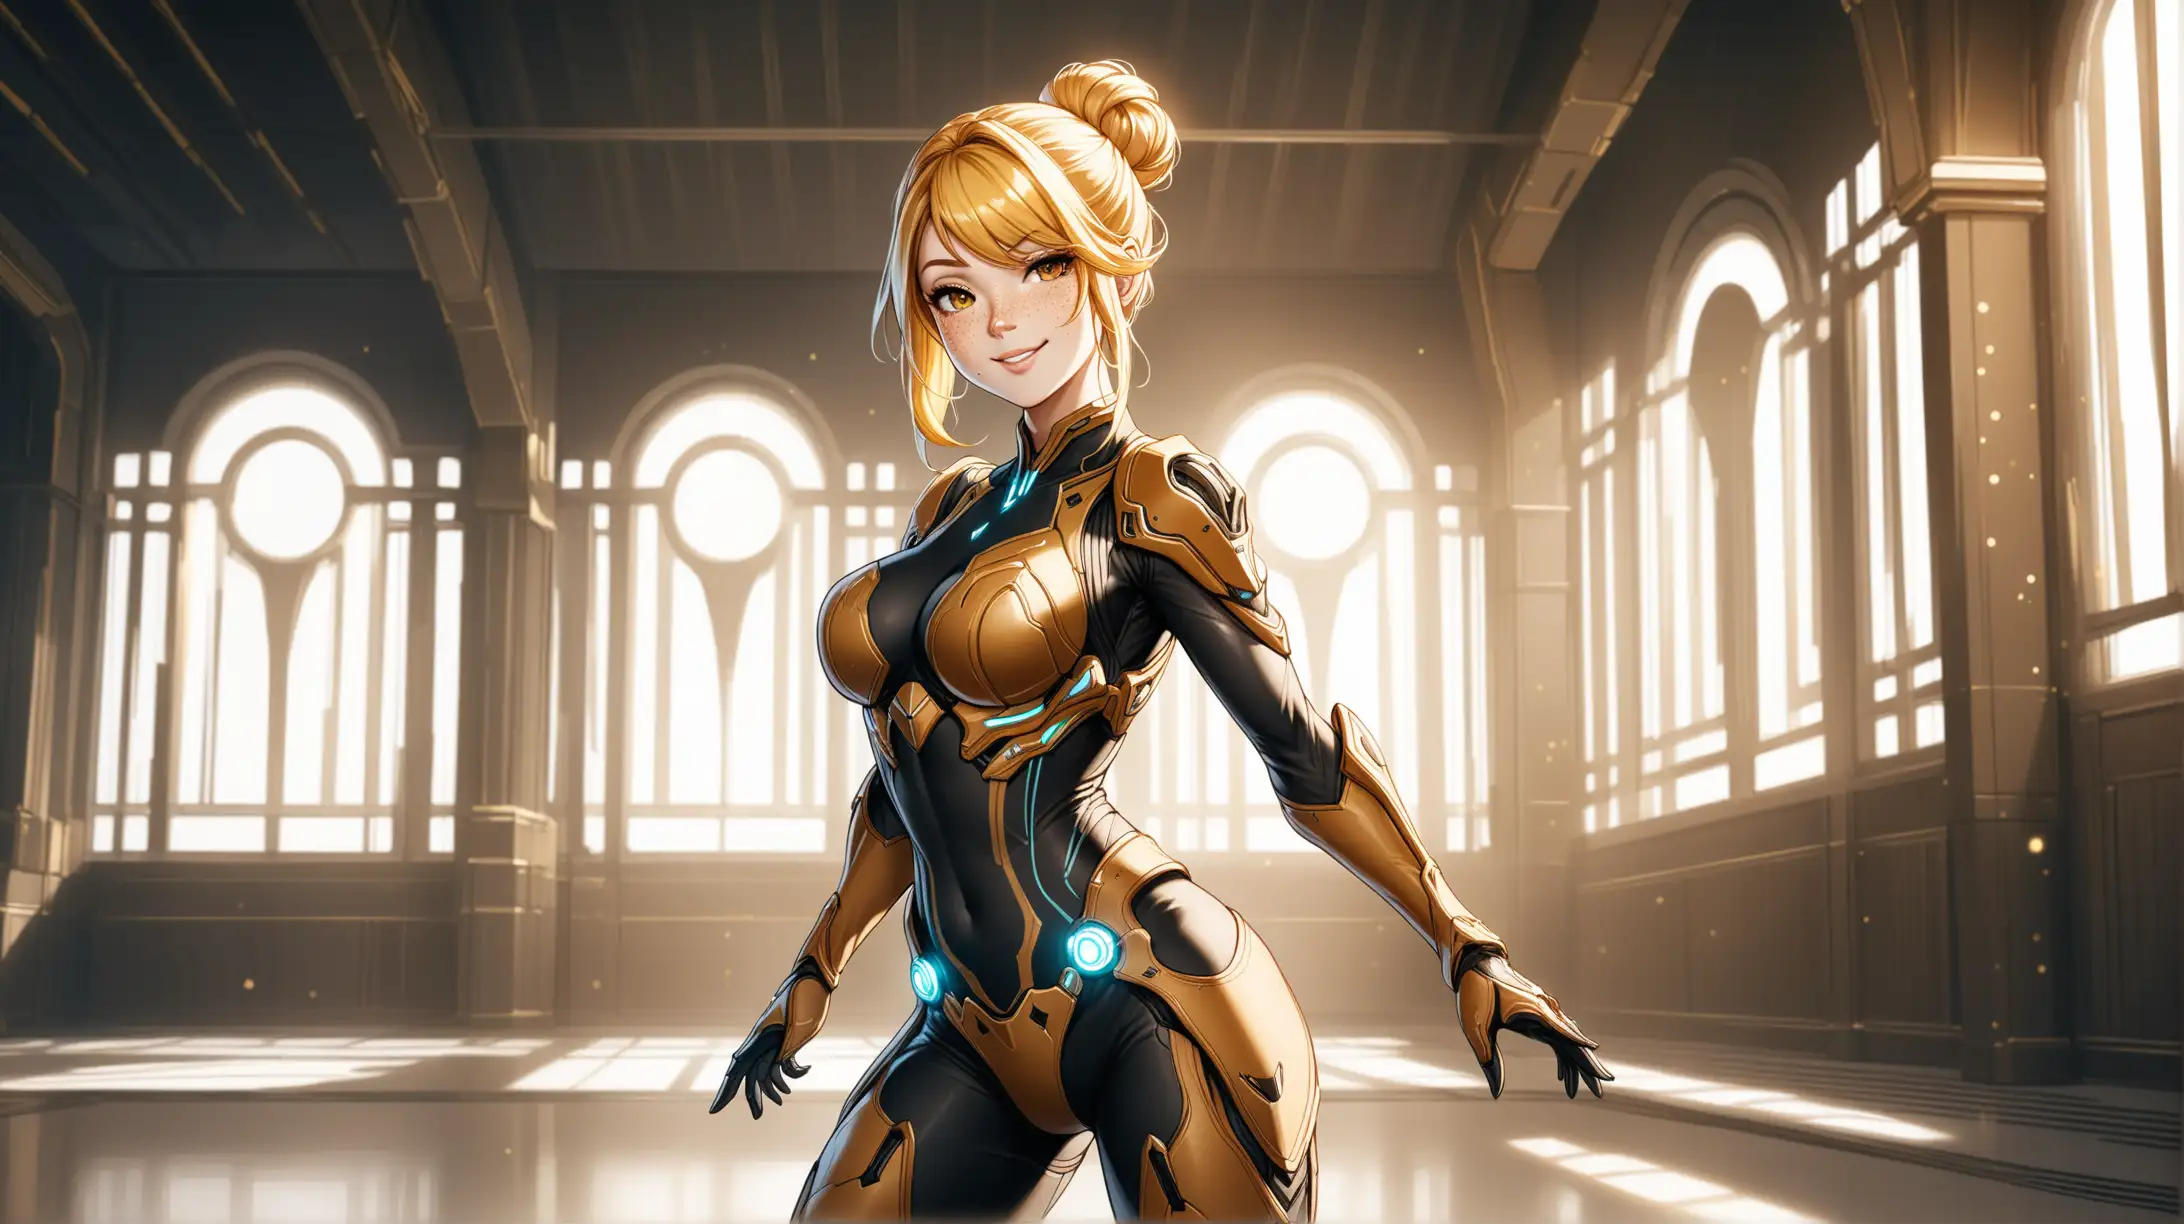 Blonde Woman with WarframeInspired Outfit Poses Dynamically in Natural Light